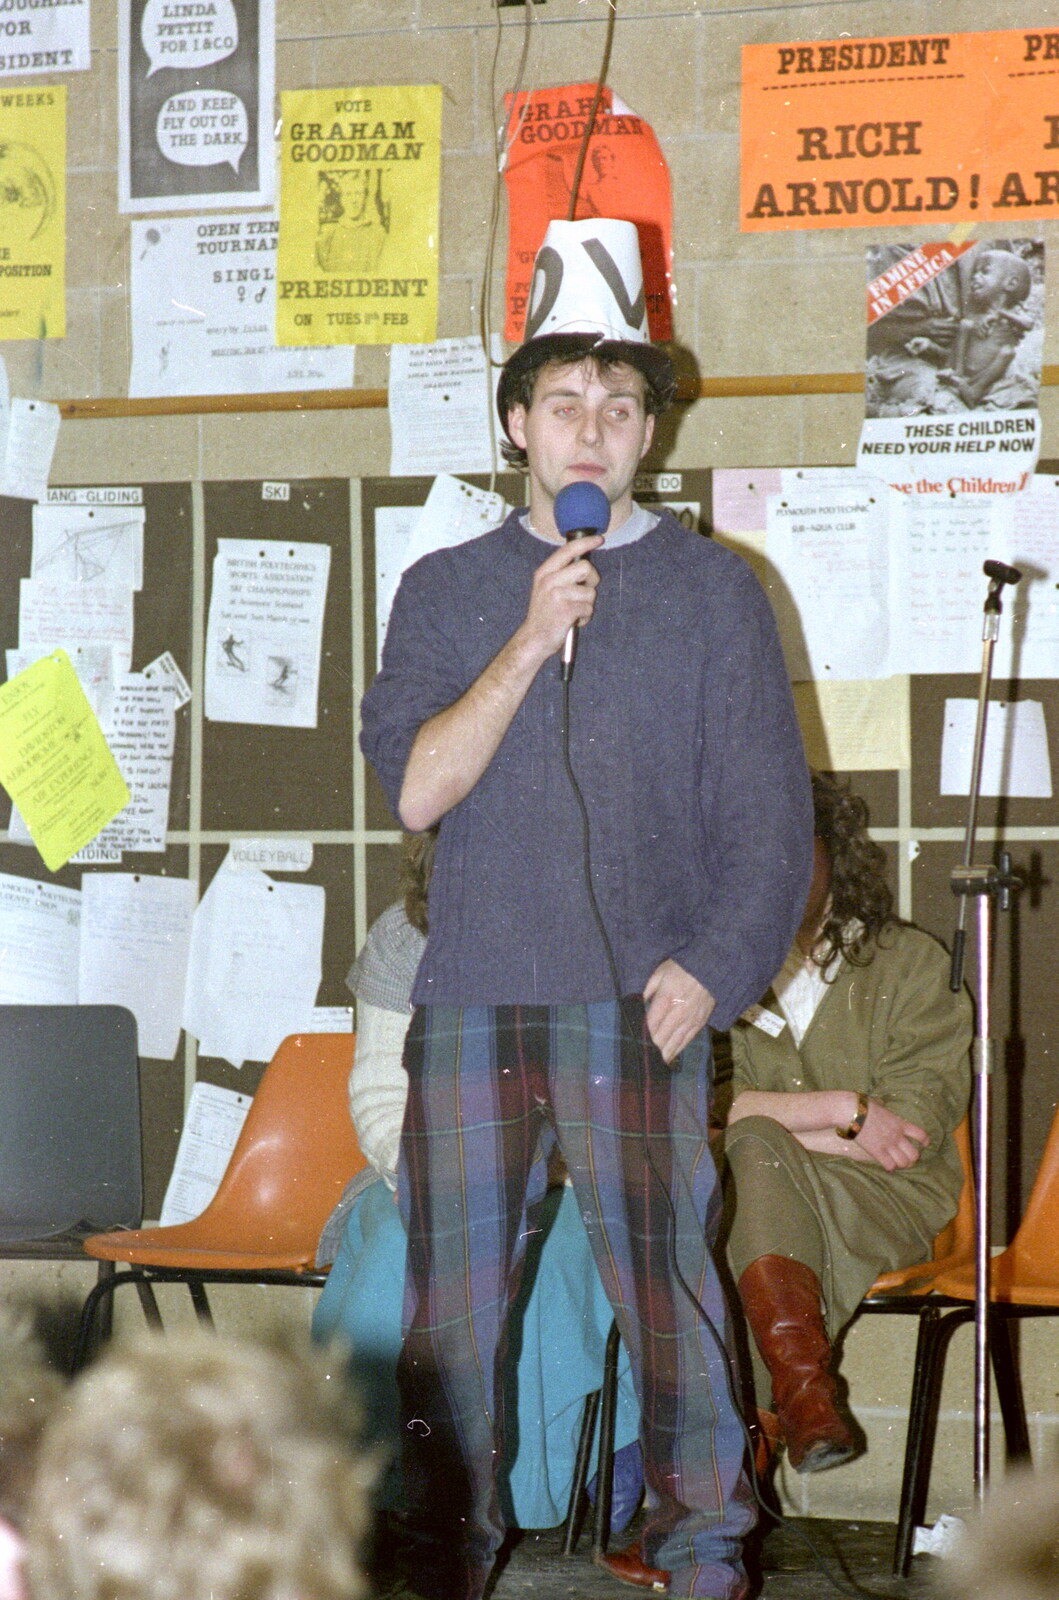 Ian Dunwoody, with a 'VD' hat on from Uni: PPSU Sabbatical Election Hustings, Plymouth - 10th February 1986